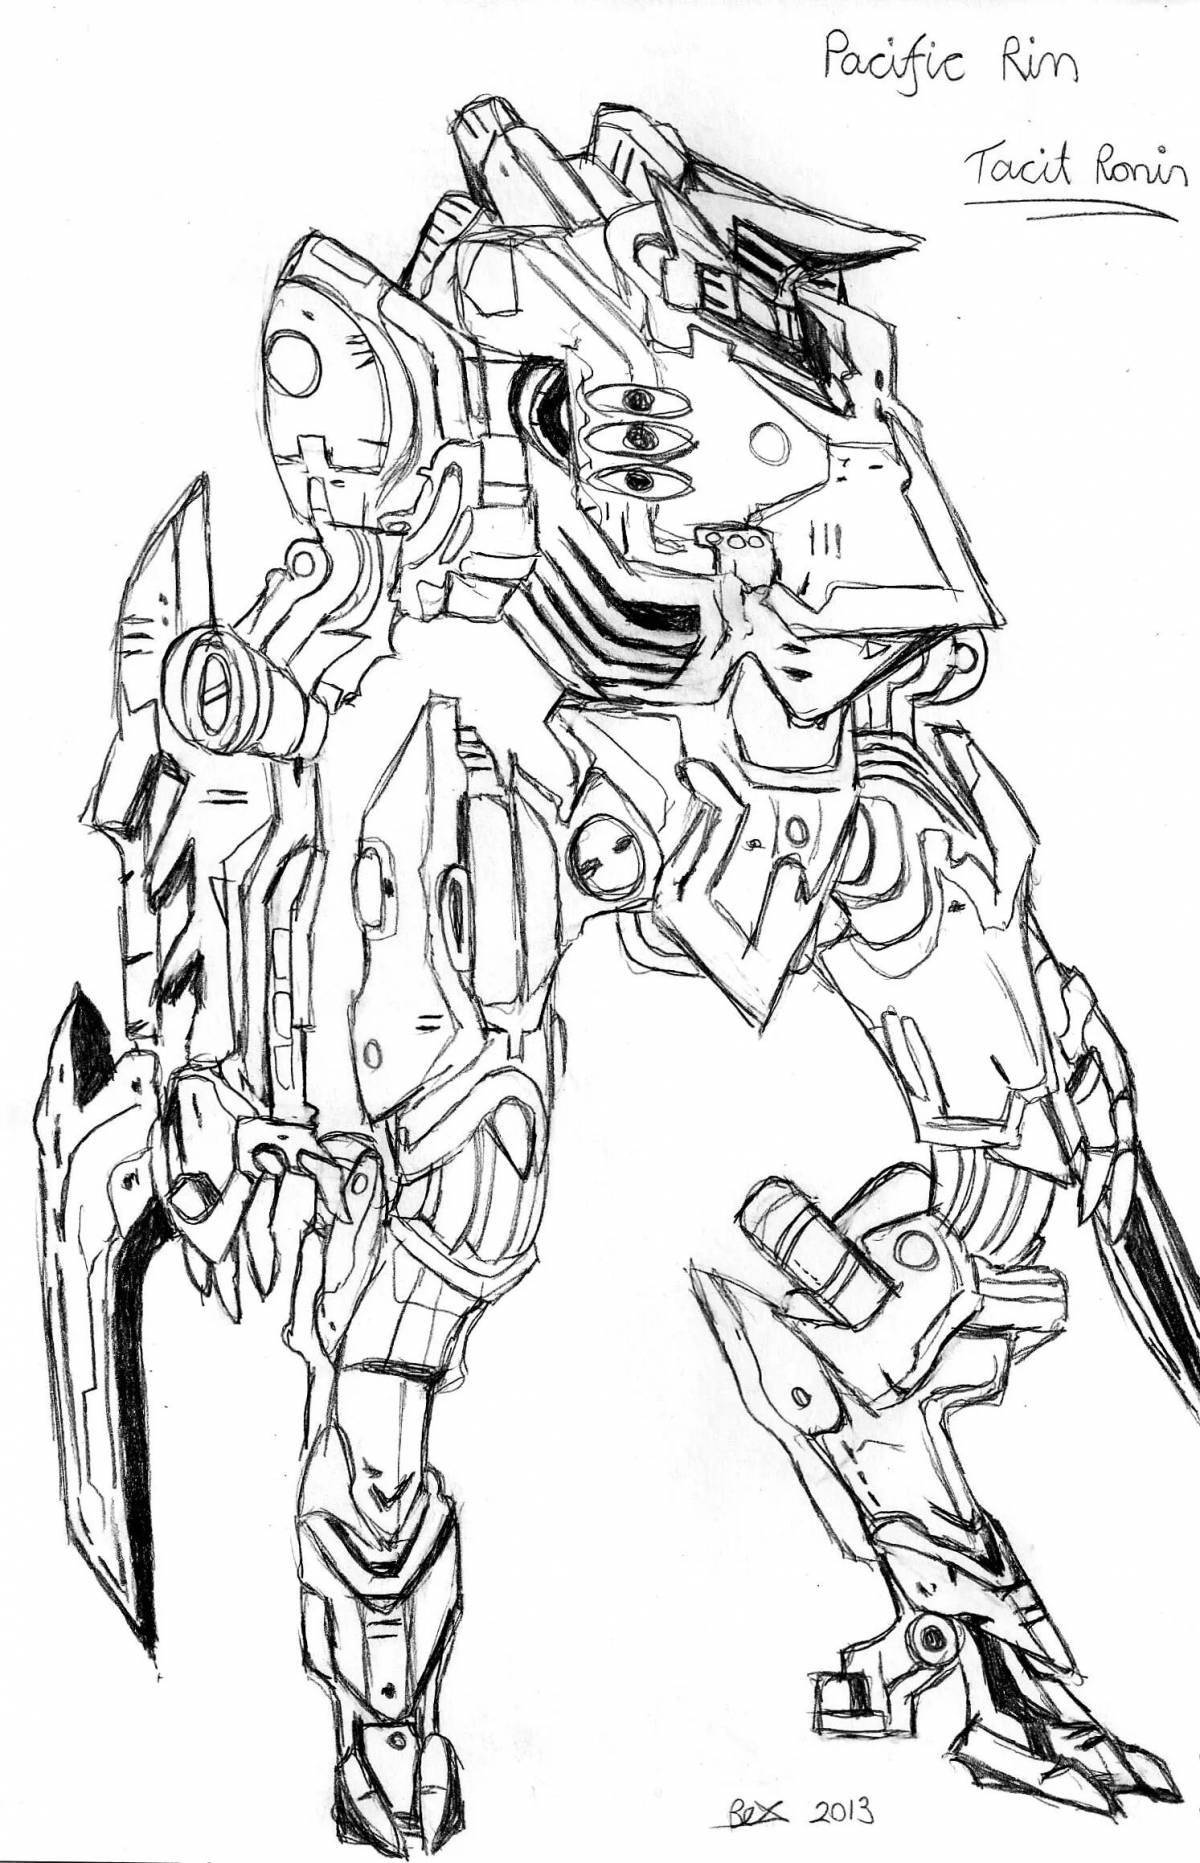 Amazing pacific rim 2 coloring page